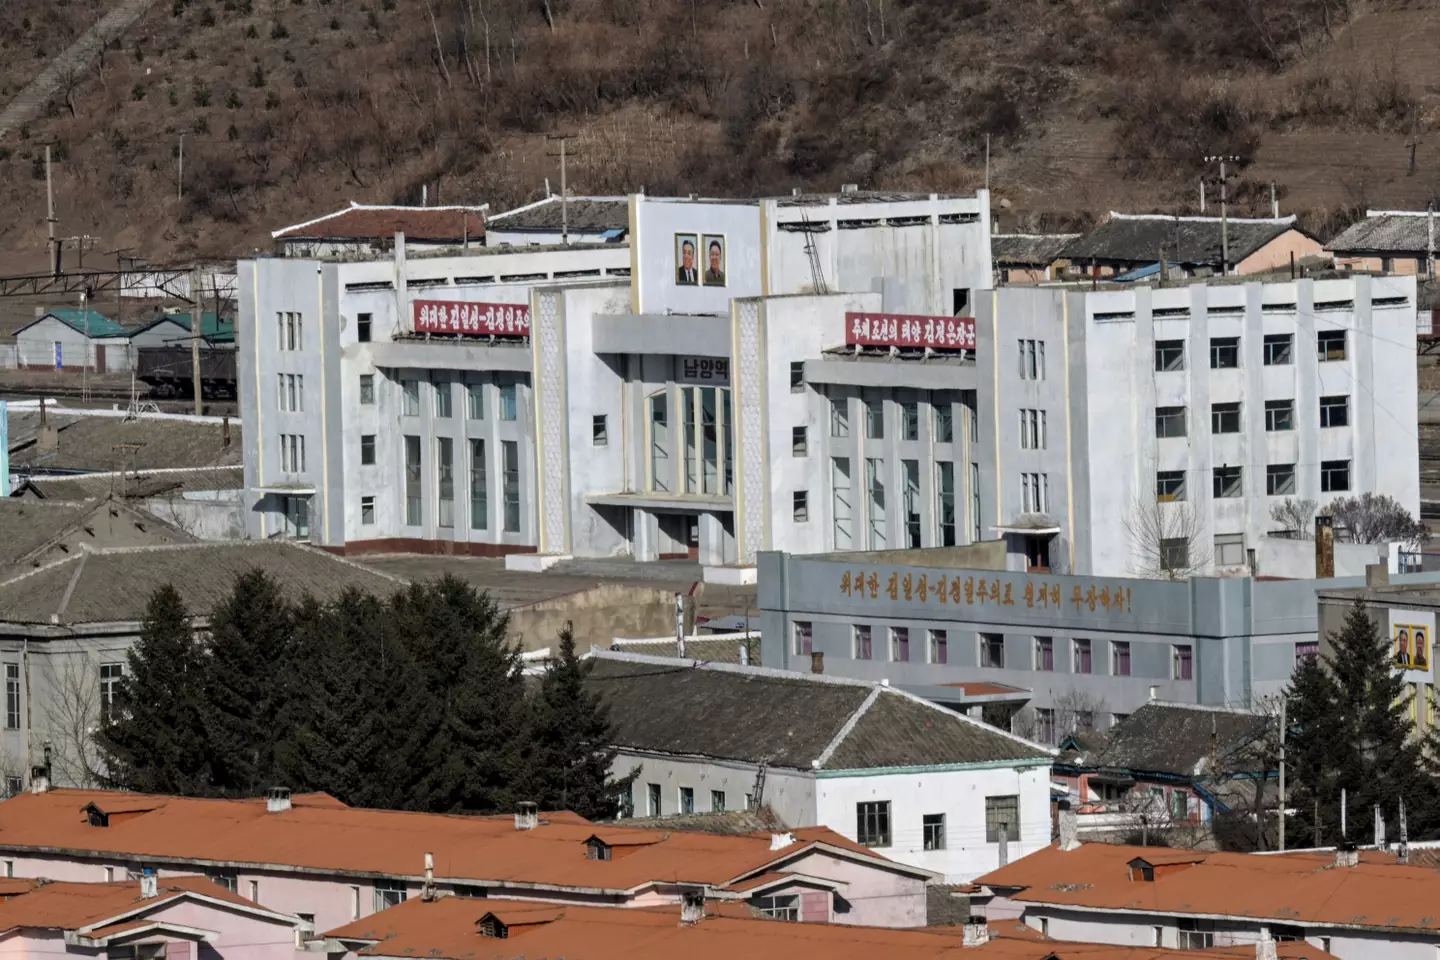 A photo of a government building in Namyang, North Korea.